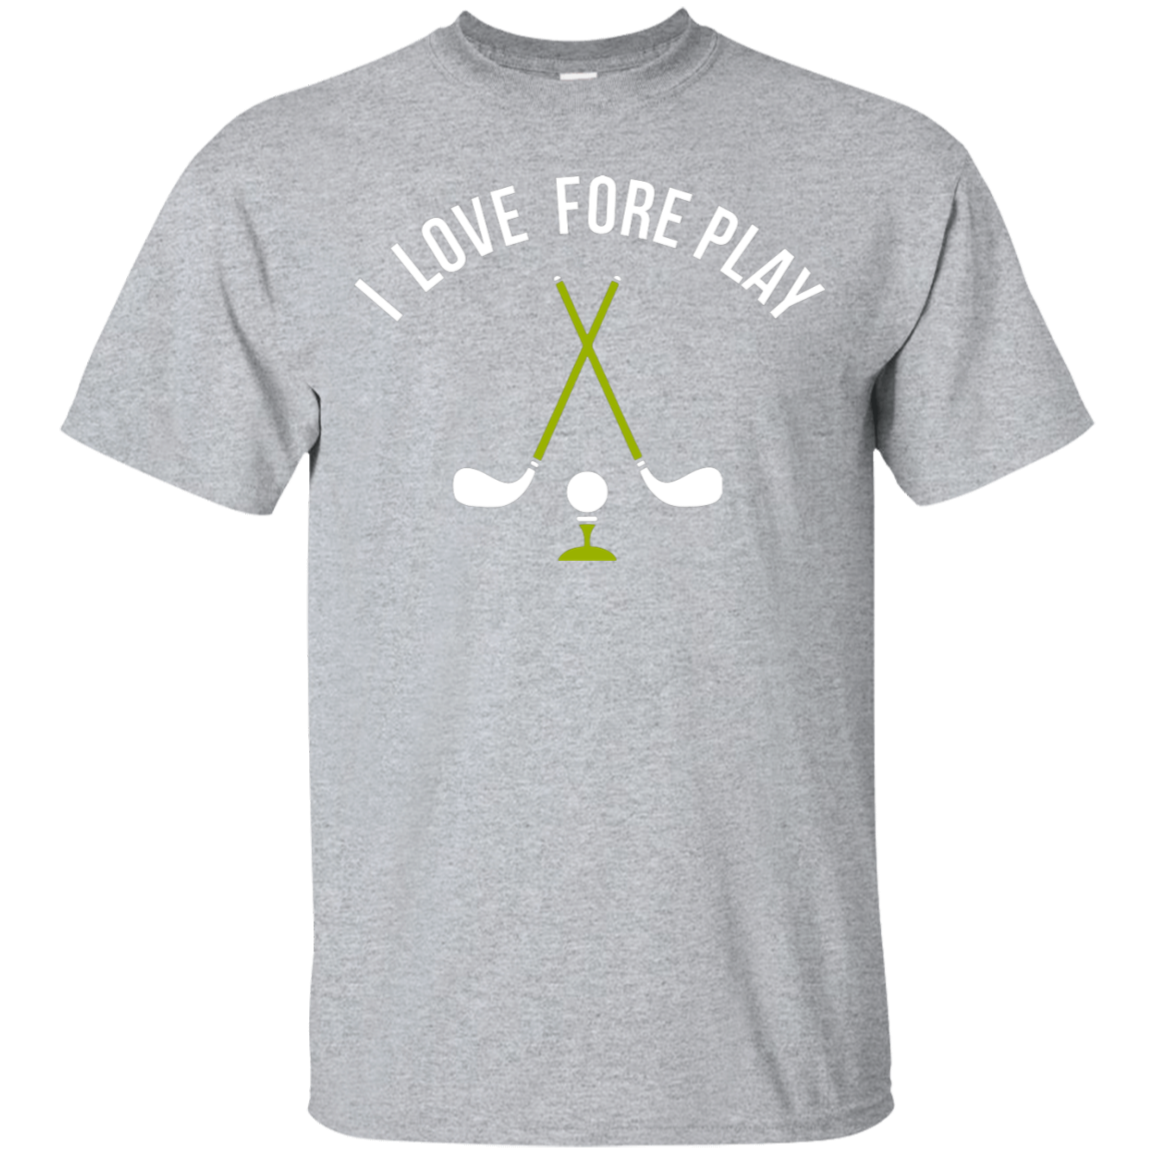 I Love Fore Play T-Shirt Apparel - The Beer Lodge